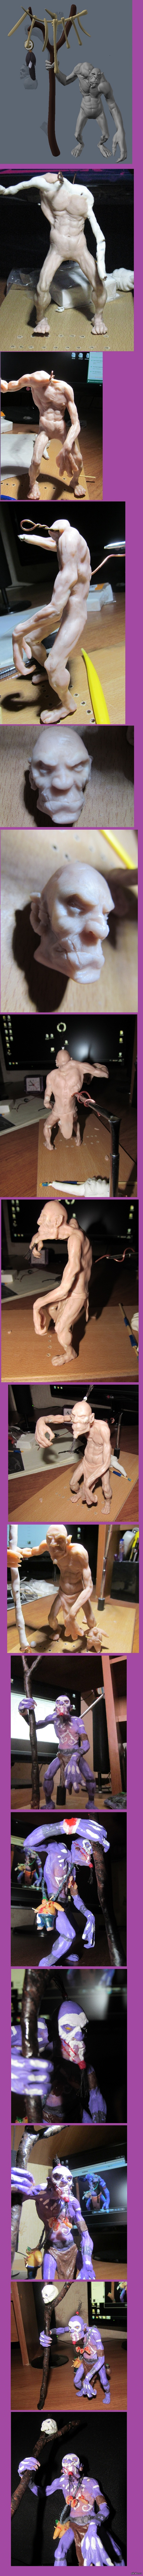    Witch Doctor'   Dota 2. : Super Sculpey.  :   :Dota 2  :Witch Doctor